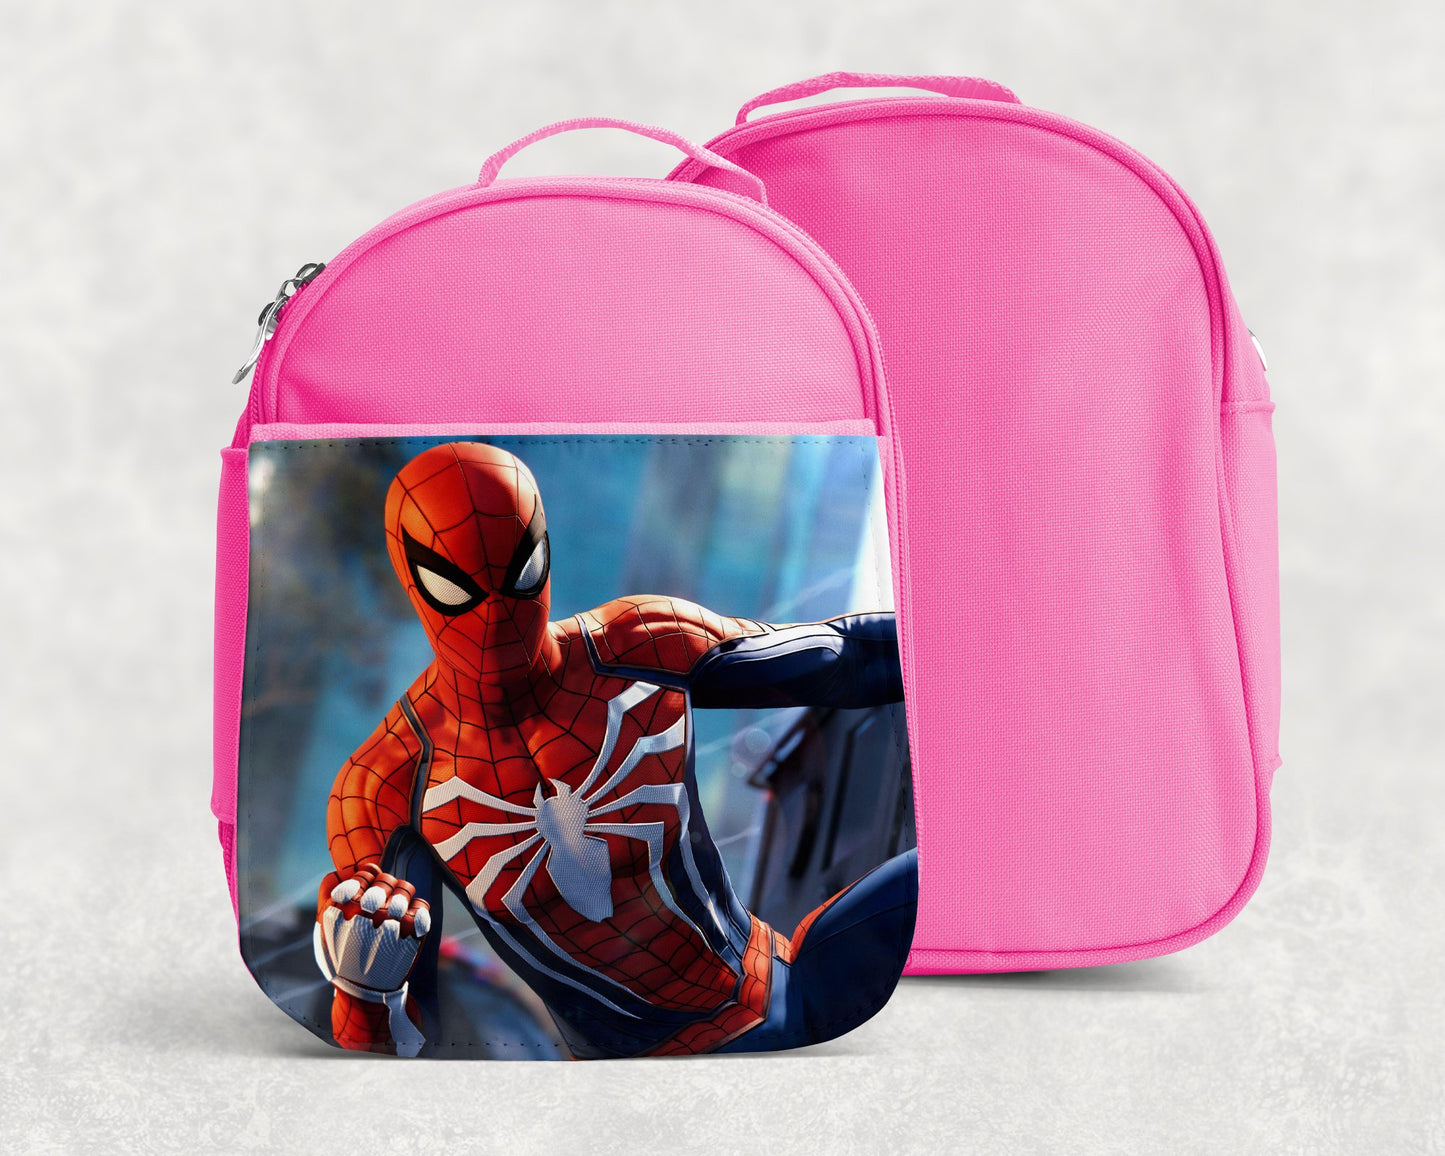 Spiderman Lunch Tote